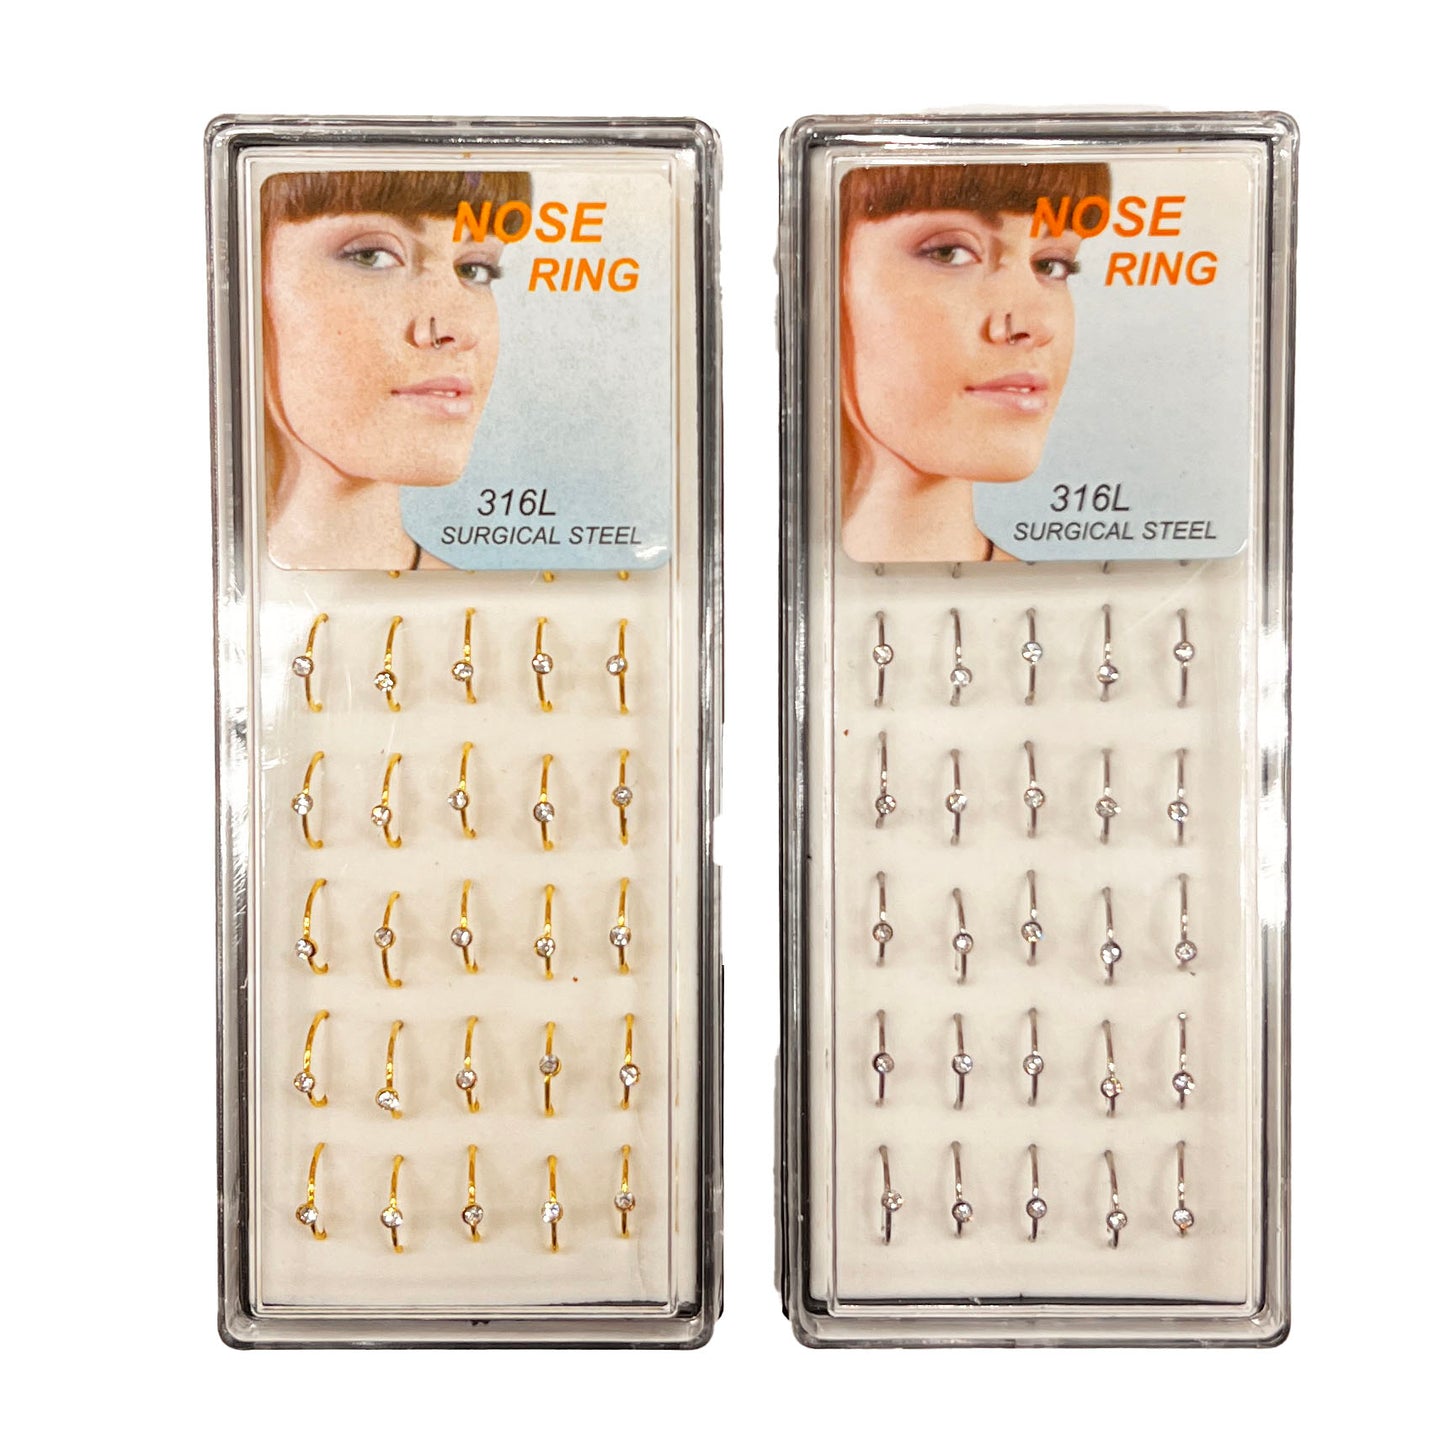 Nose Rings - Pack of 40